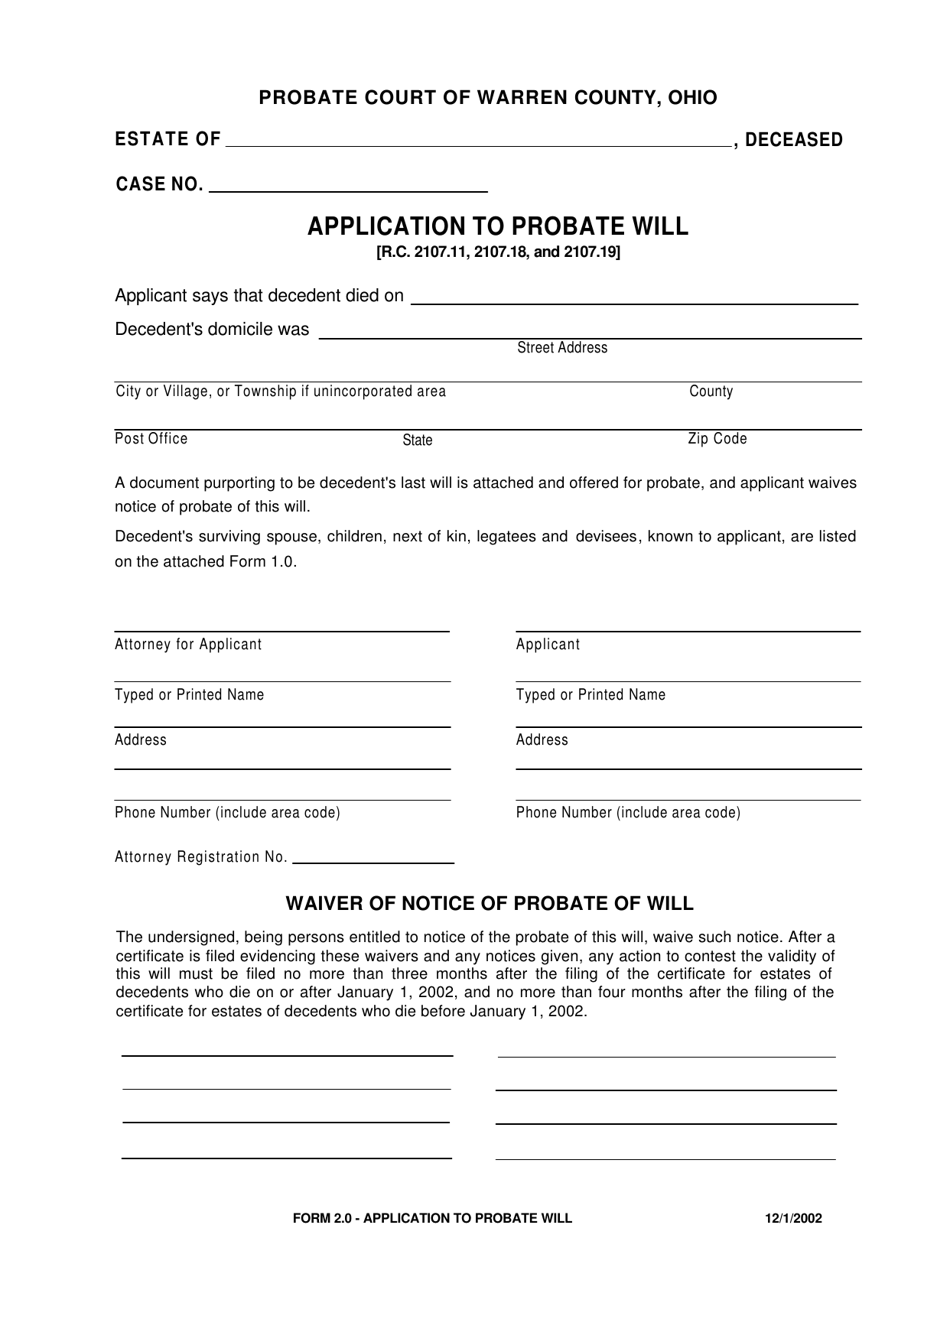 Form 2.0 Application to Probate Will - Warren County, Ohio, Page 1